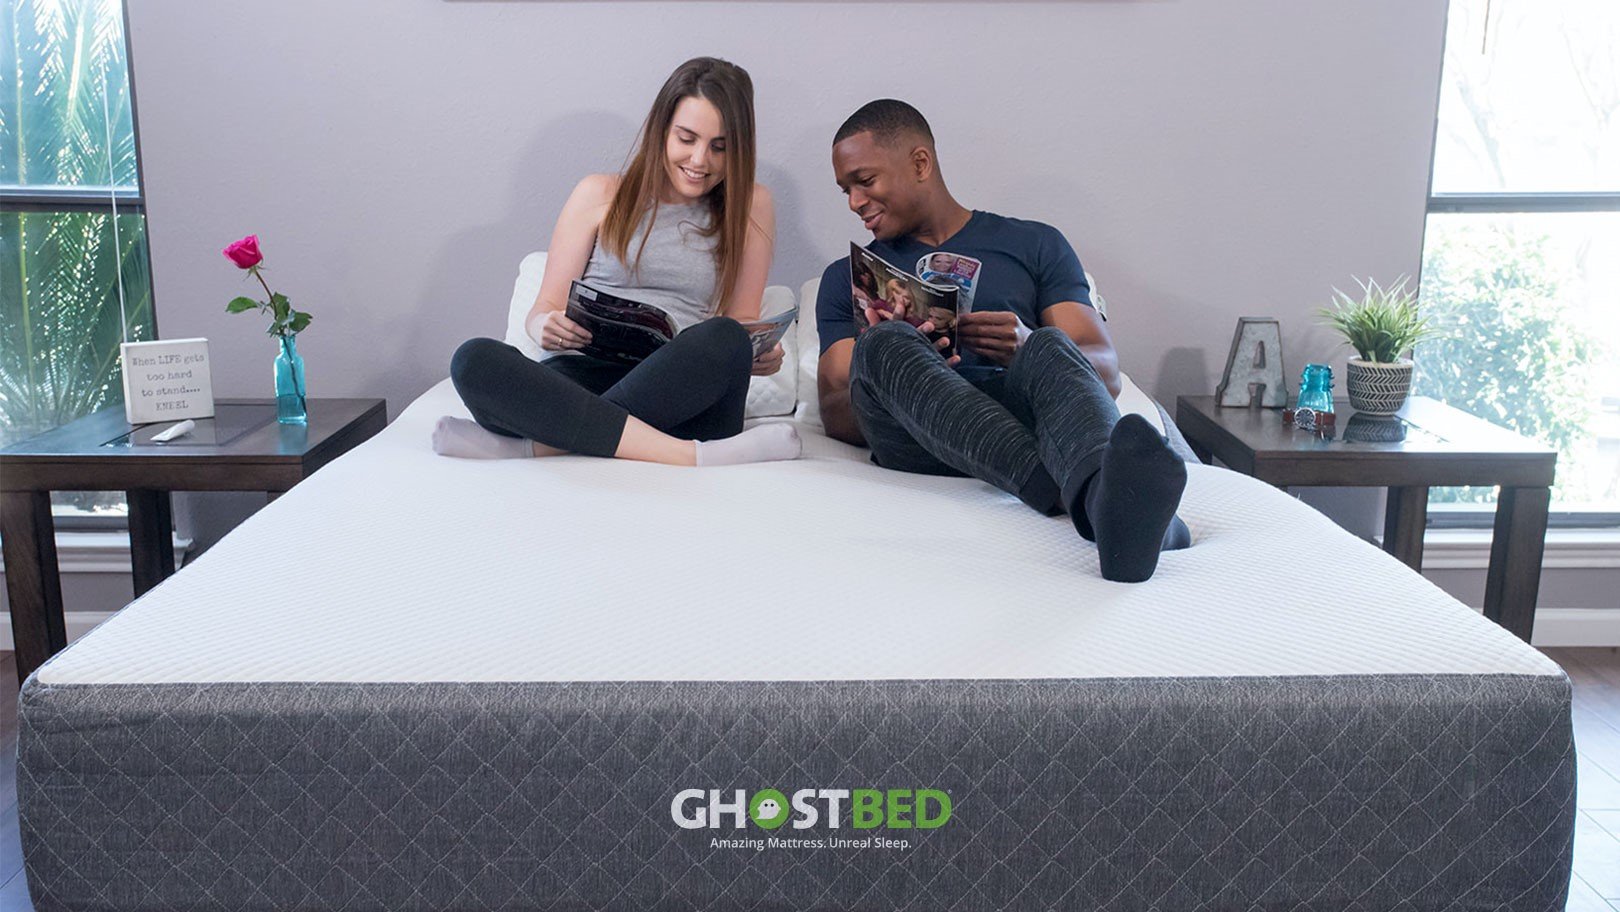 GhostBed discount codes, sales and deals: A man and a woman relax on the GhostBed Classic together